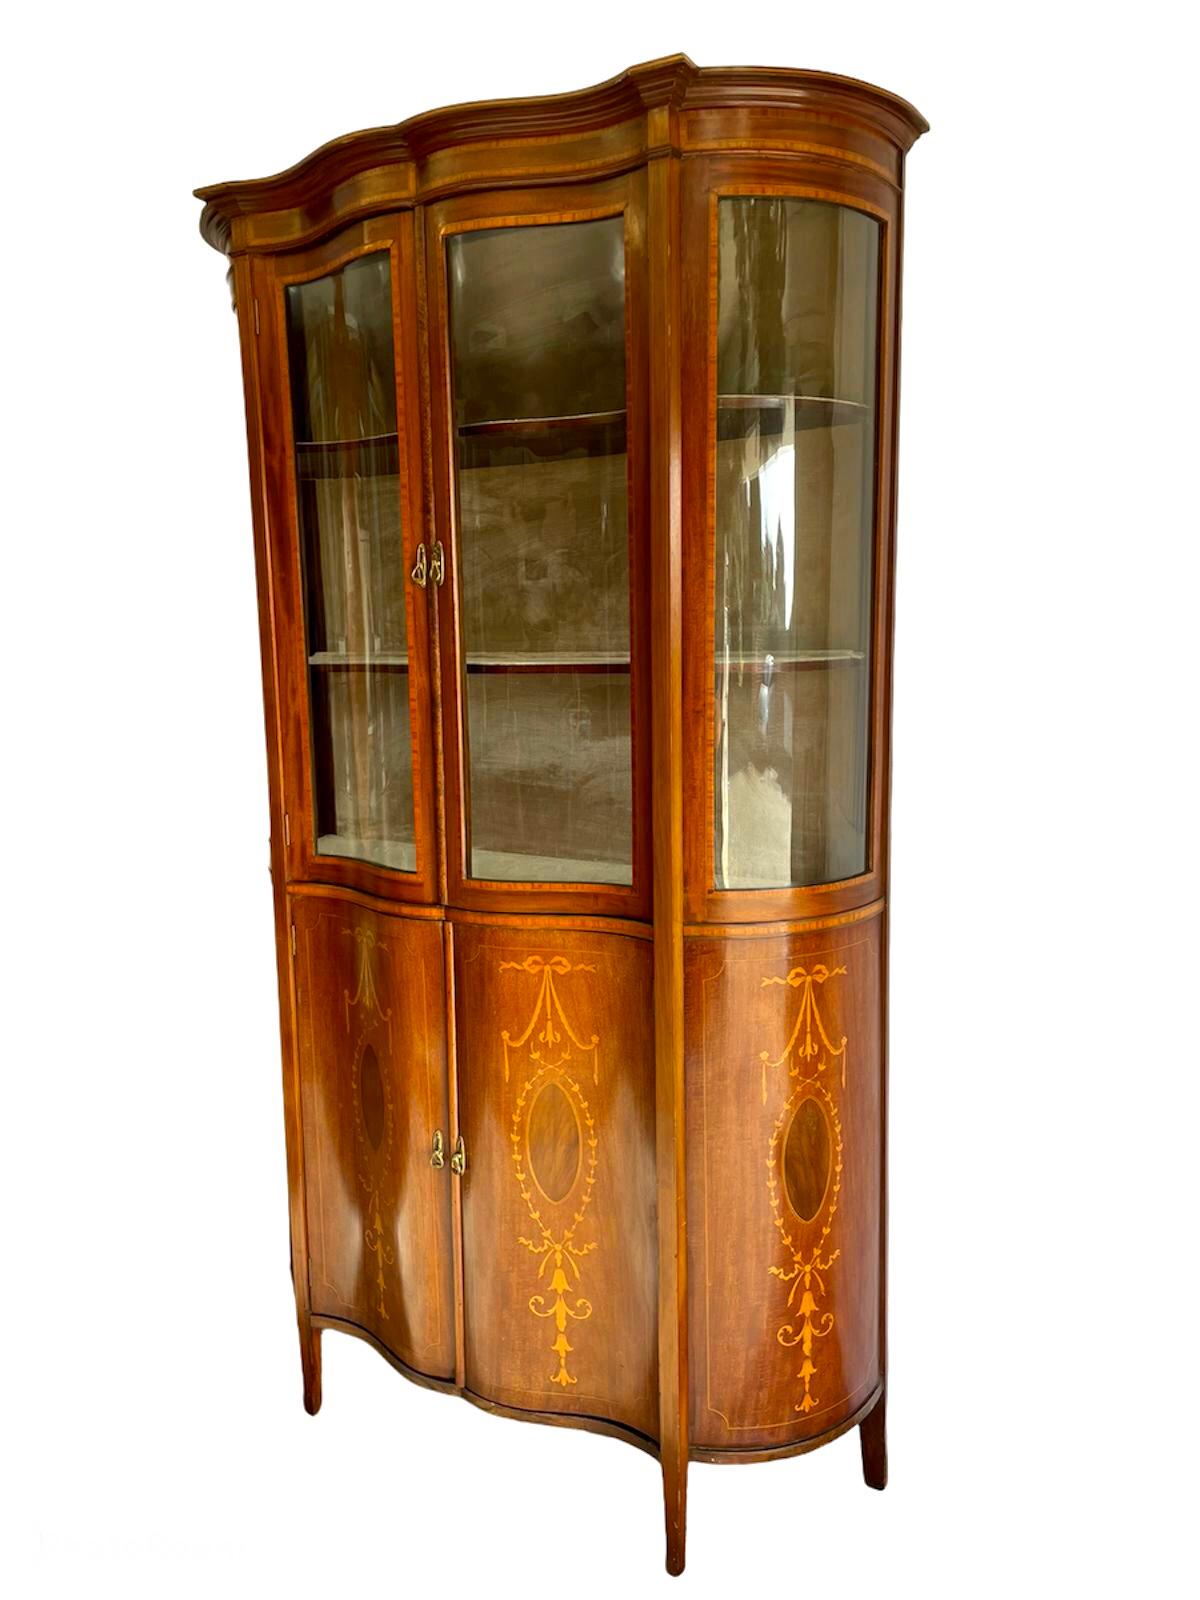 Fine antique 19th century Victorian mahogany inlaid serpentine shaped display cabinet having a very attractive serpentine shaped top section with pretty inlaid cornice, serpentine glazed ends, two inlaid shaped mahogany glazed doors with original